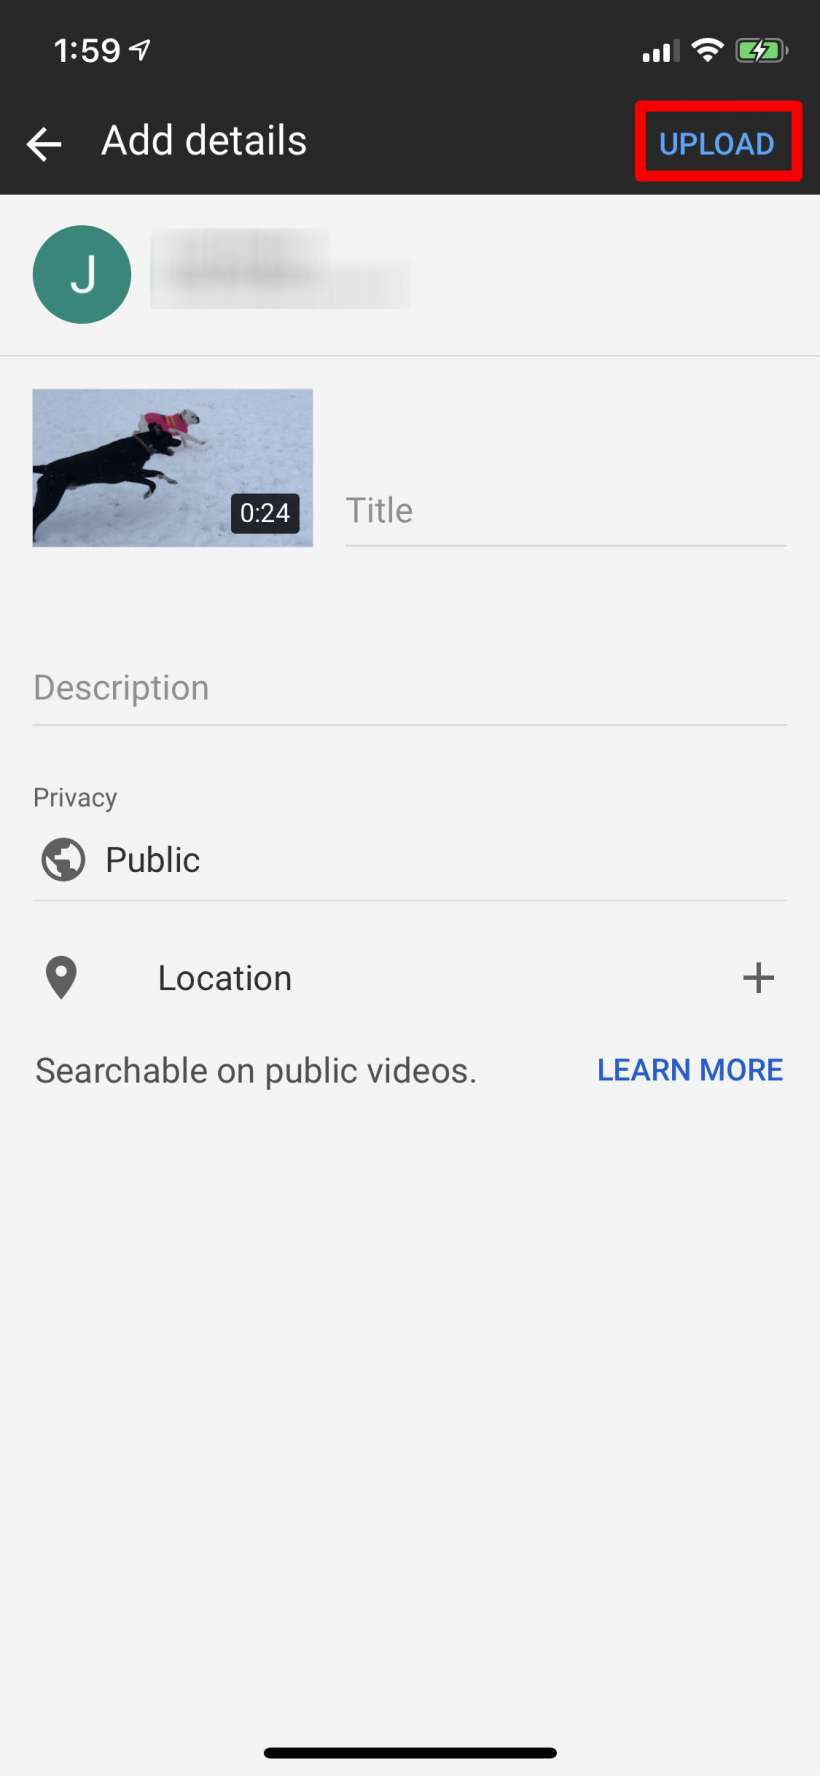 How to start a YouTube channel from your iPhone or iPad.